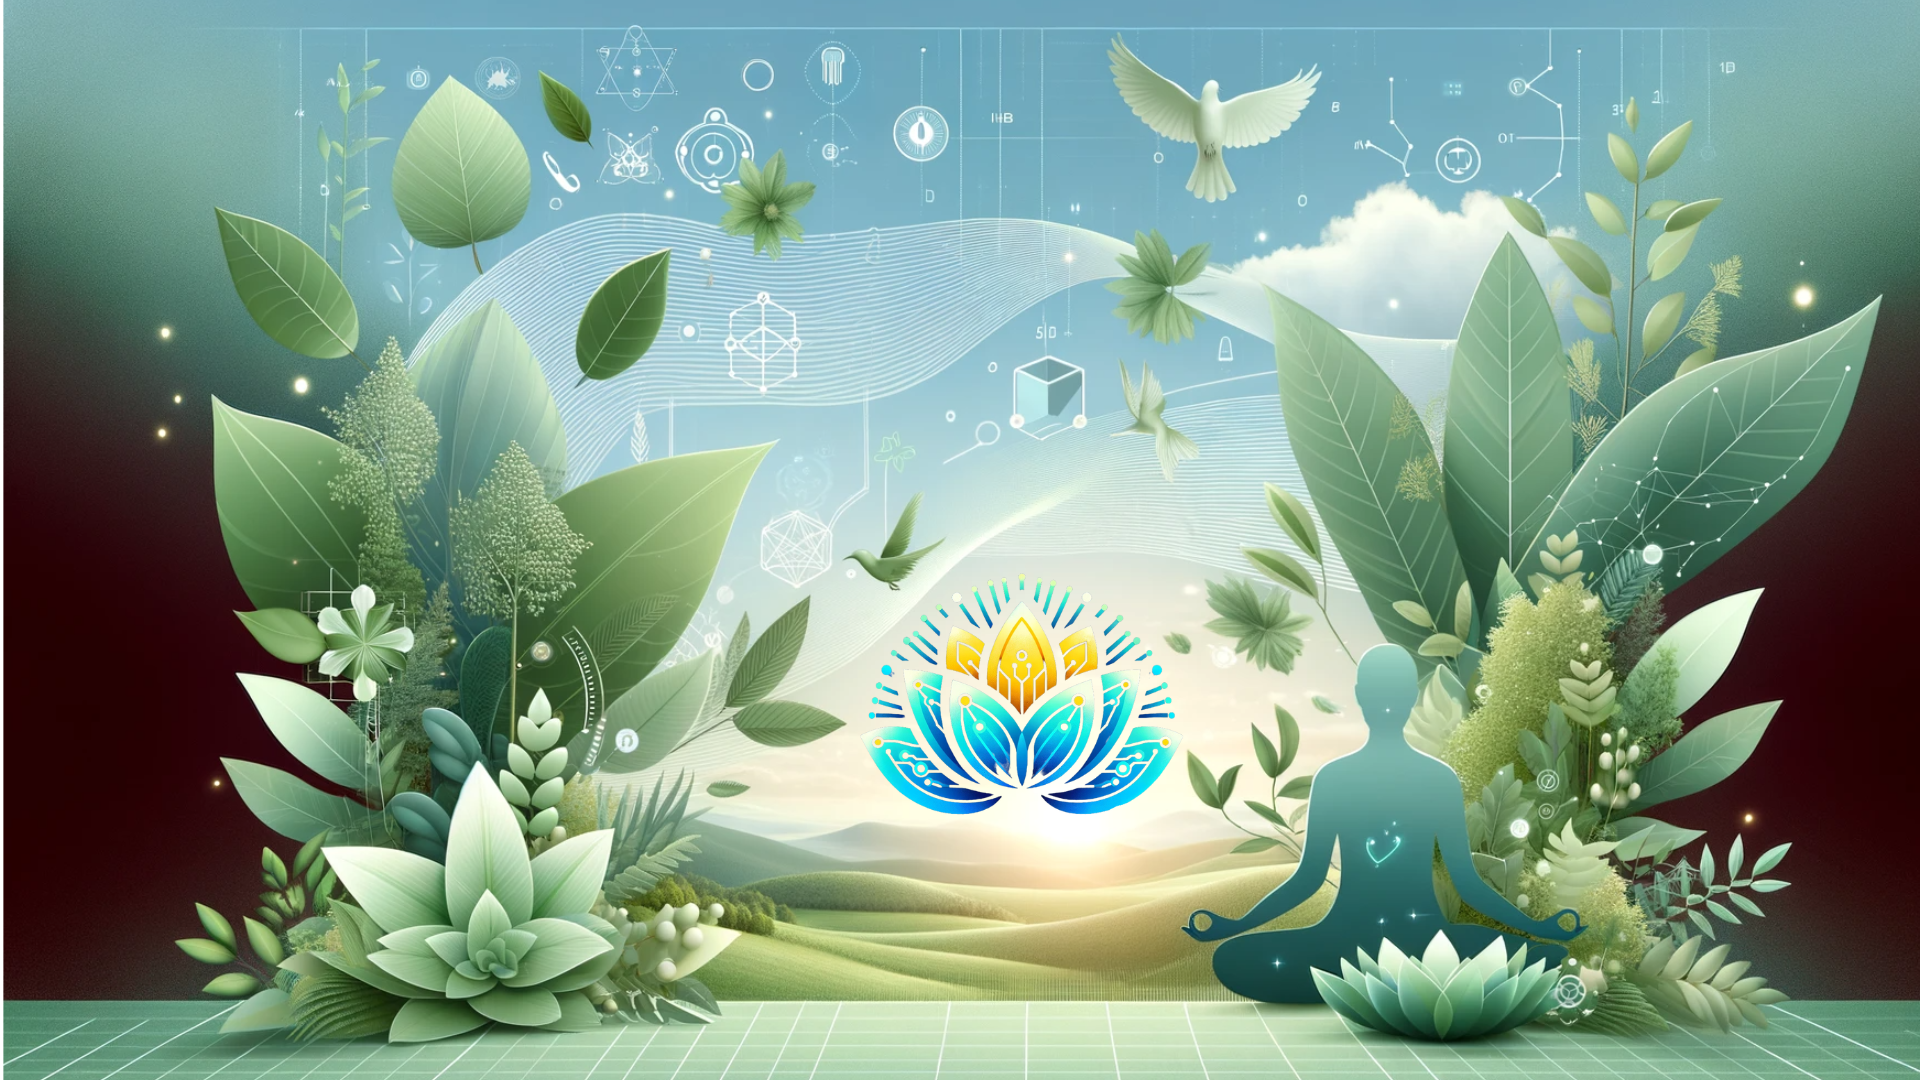 Futuristic graphic with Migra-Well logo showing a blend of technology and migraine wellness